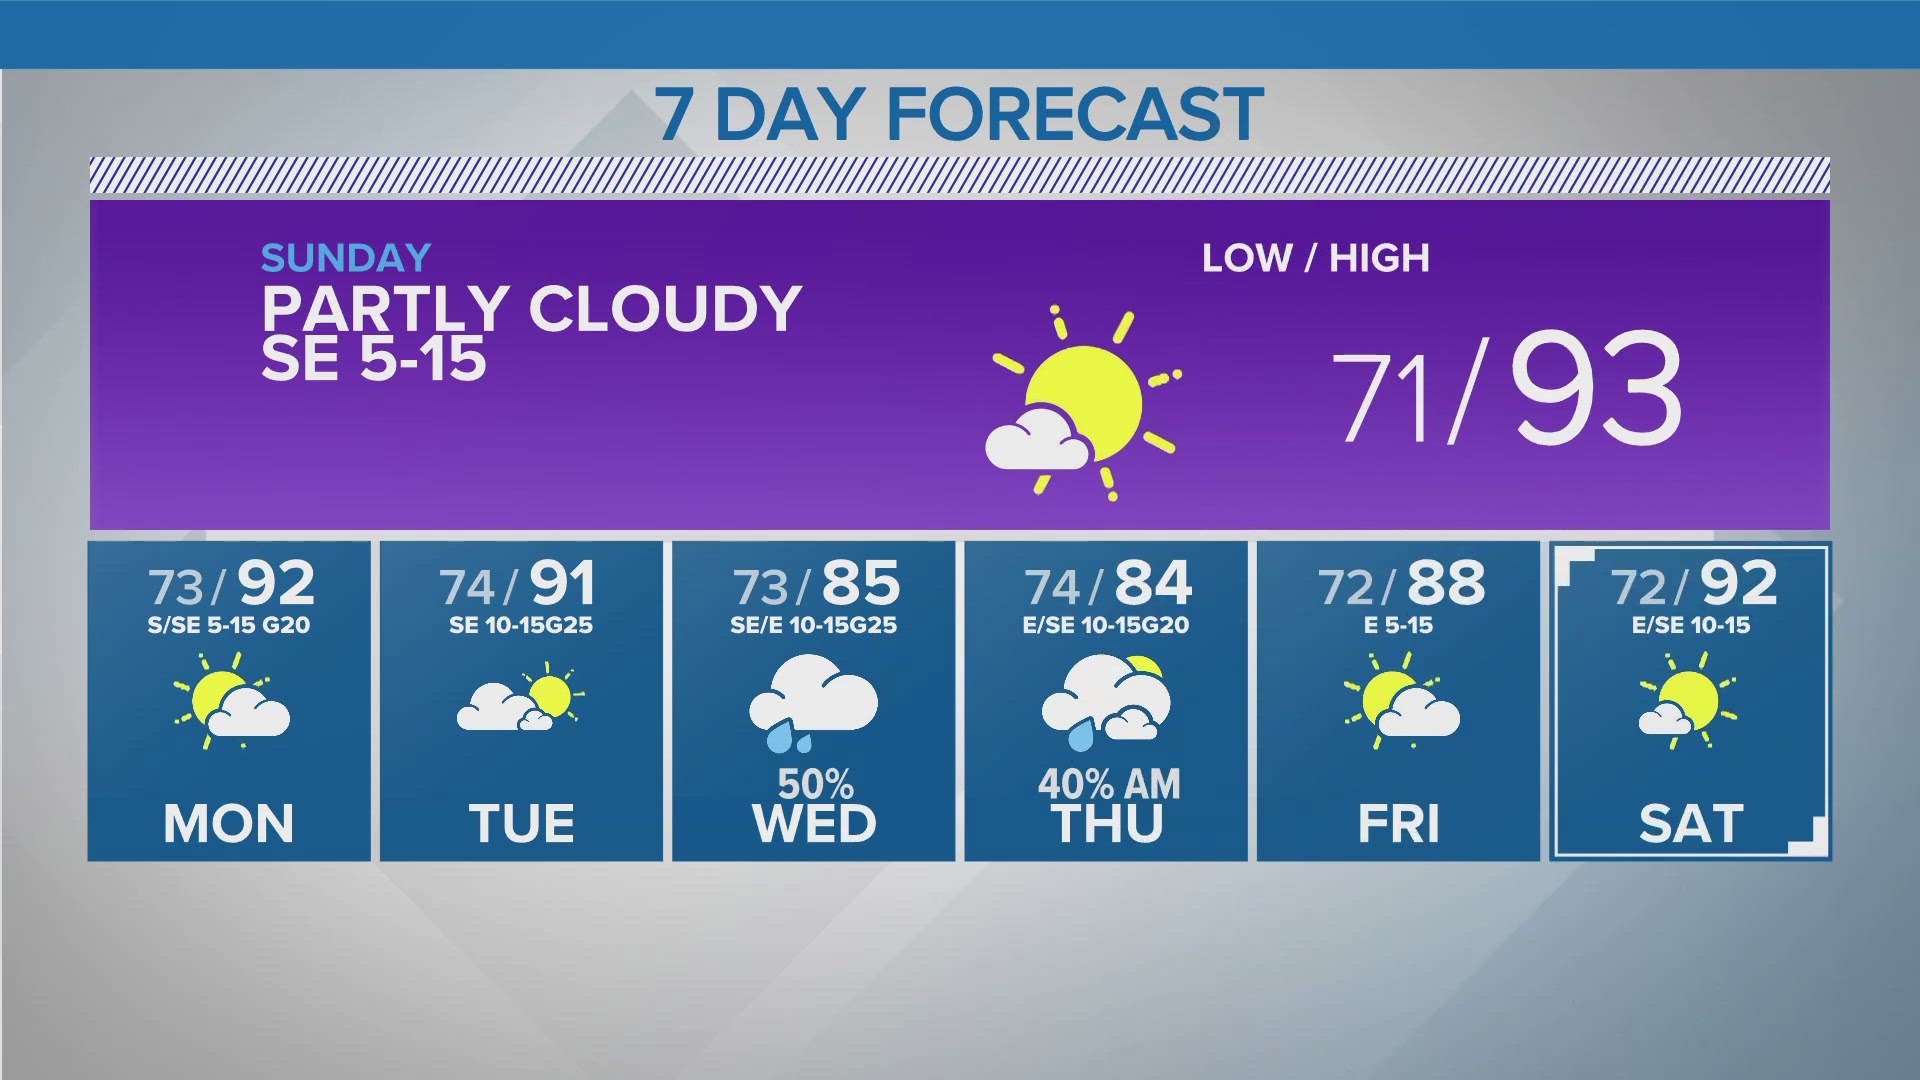 Clearing out with a warming pattern and dry Fathers Day weekend; rain chances early next week.